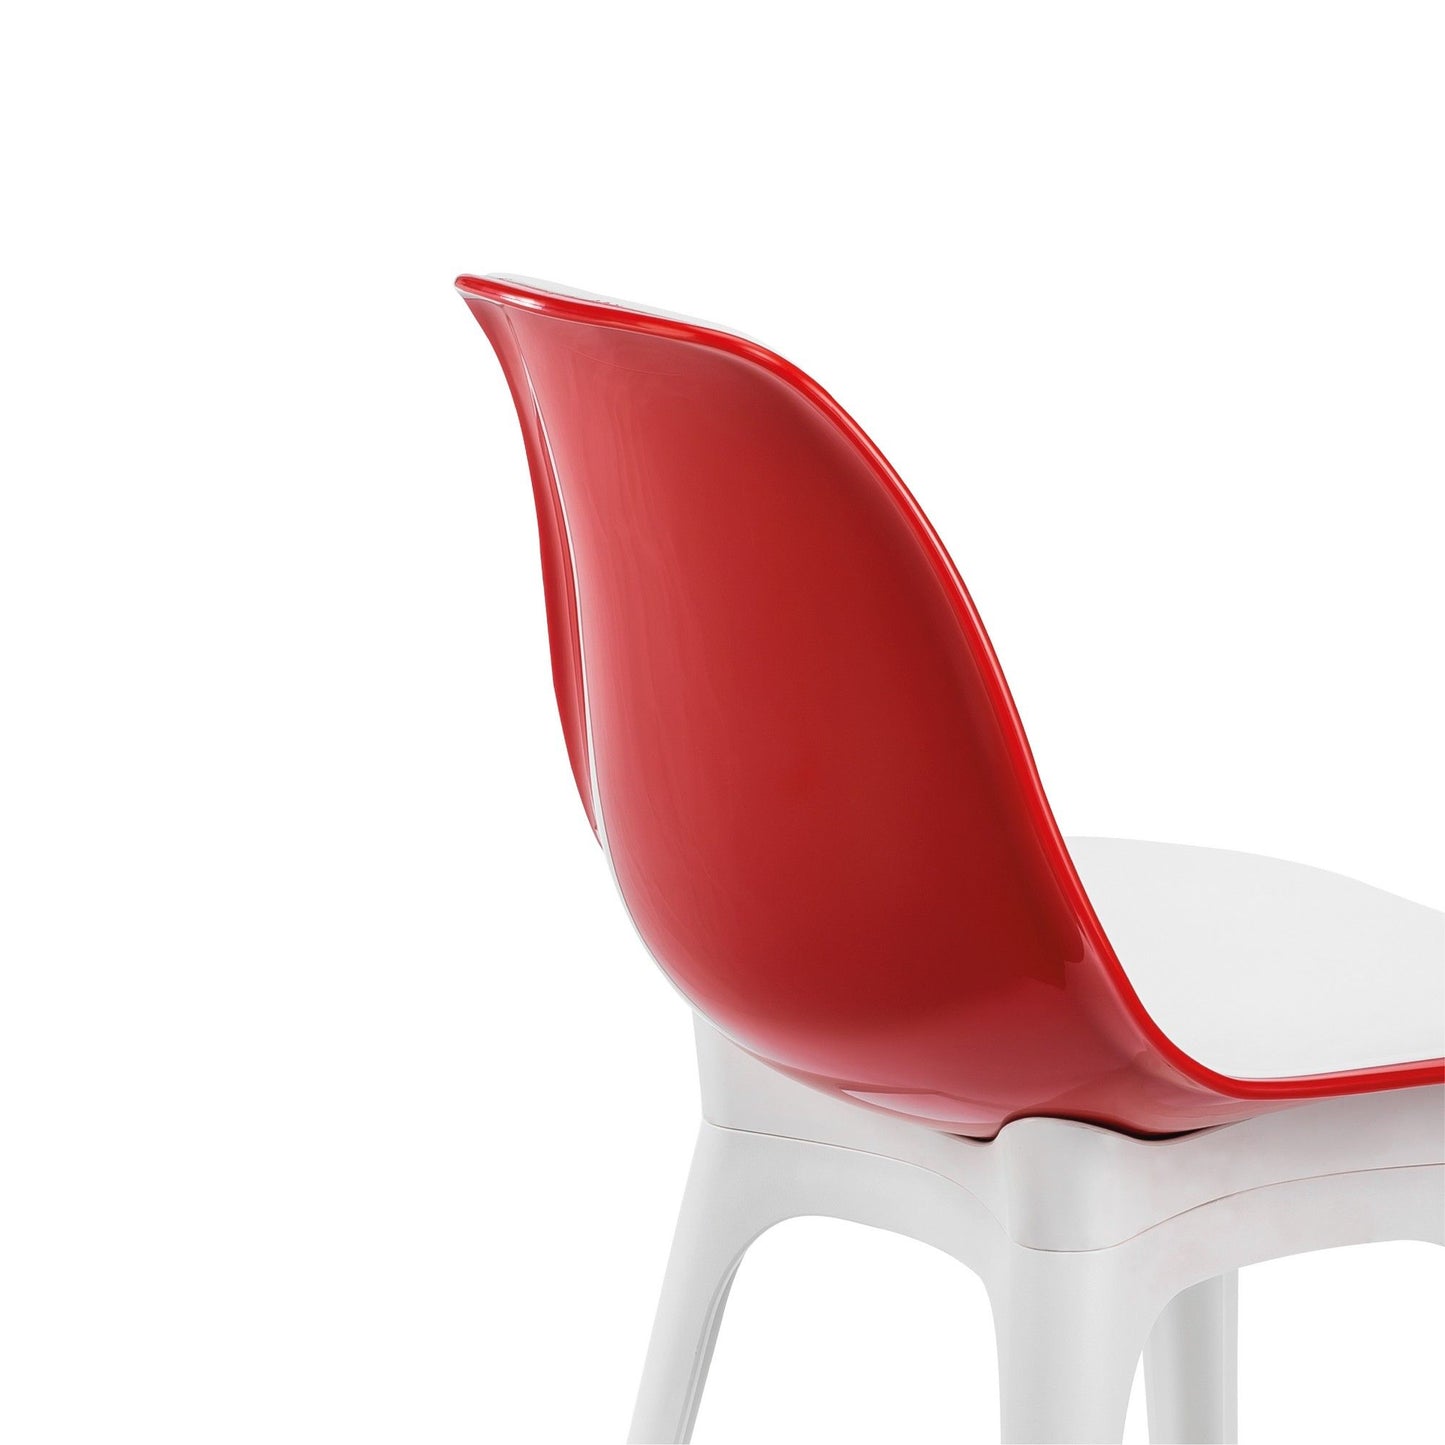 Eos-P - Red - Chair Set (2 Pieces)